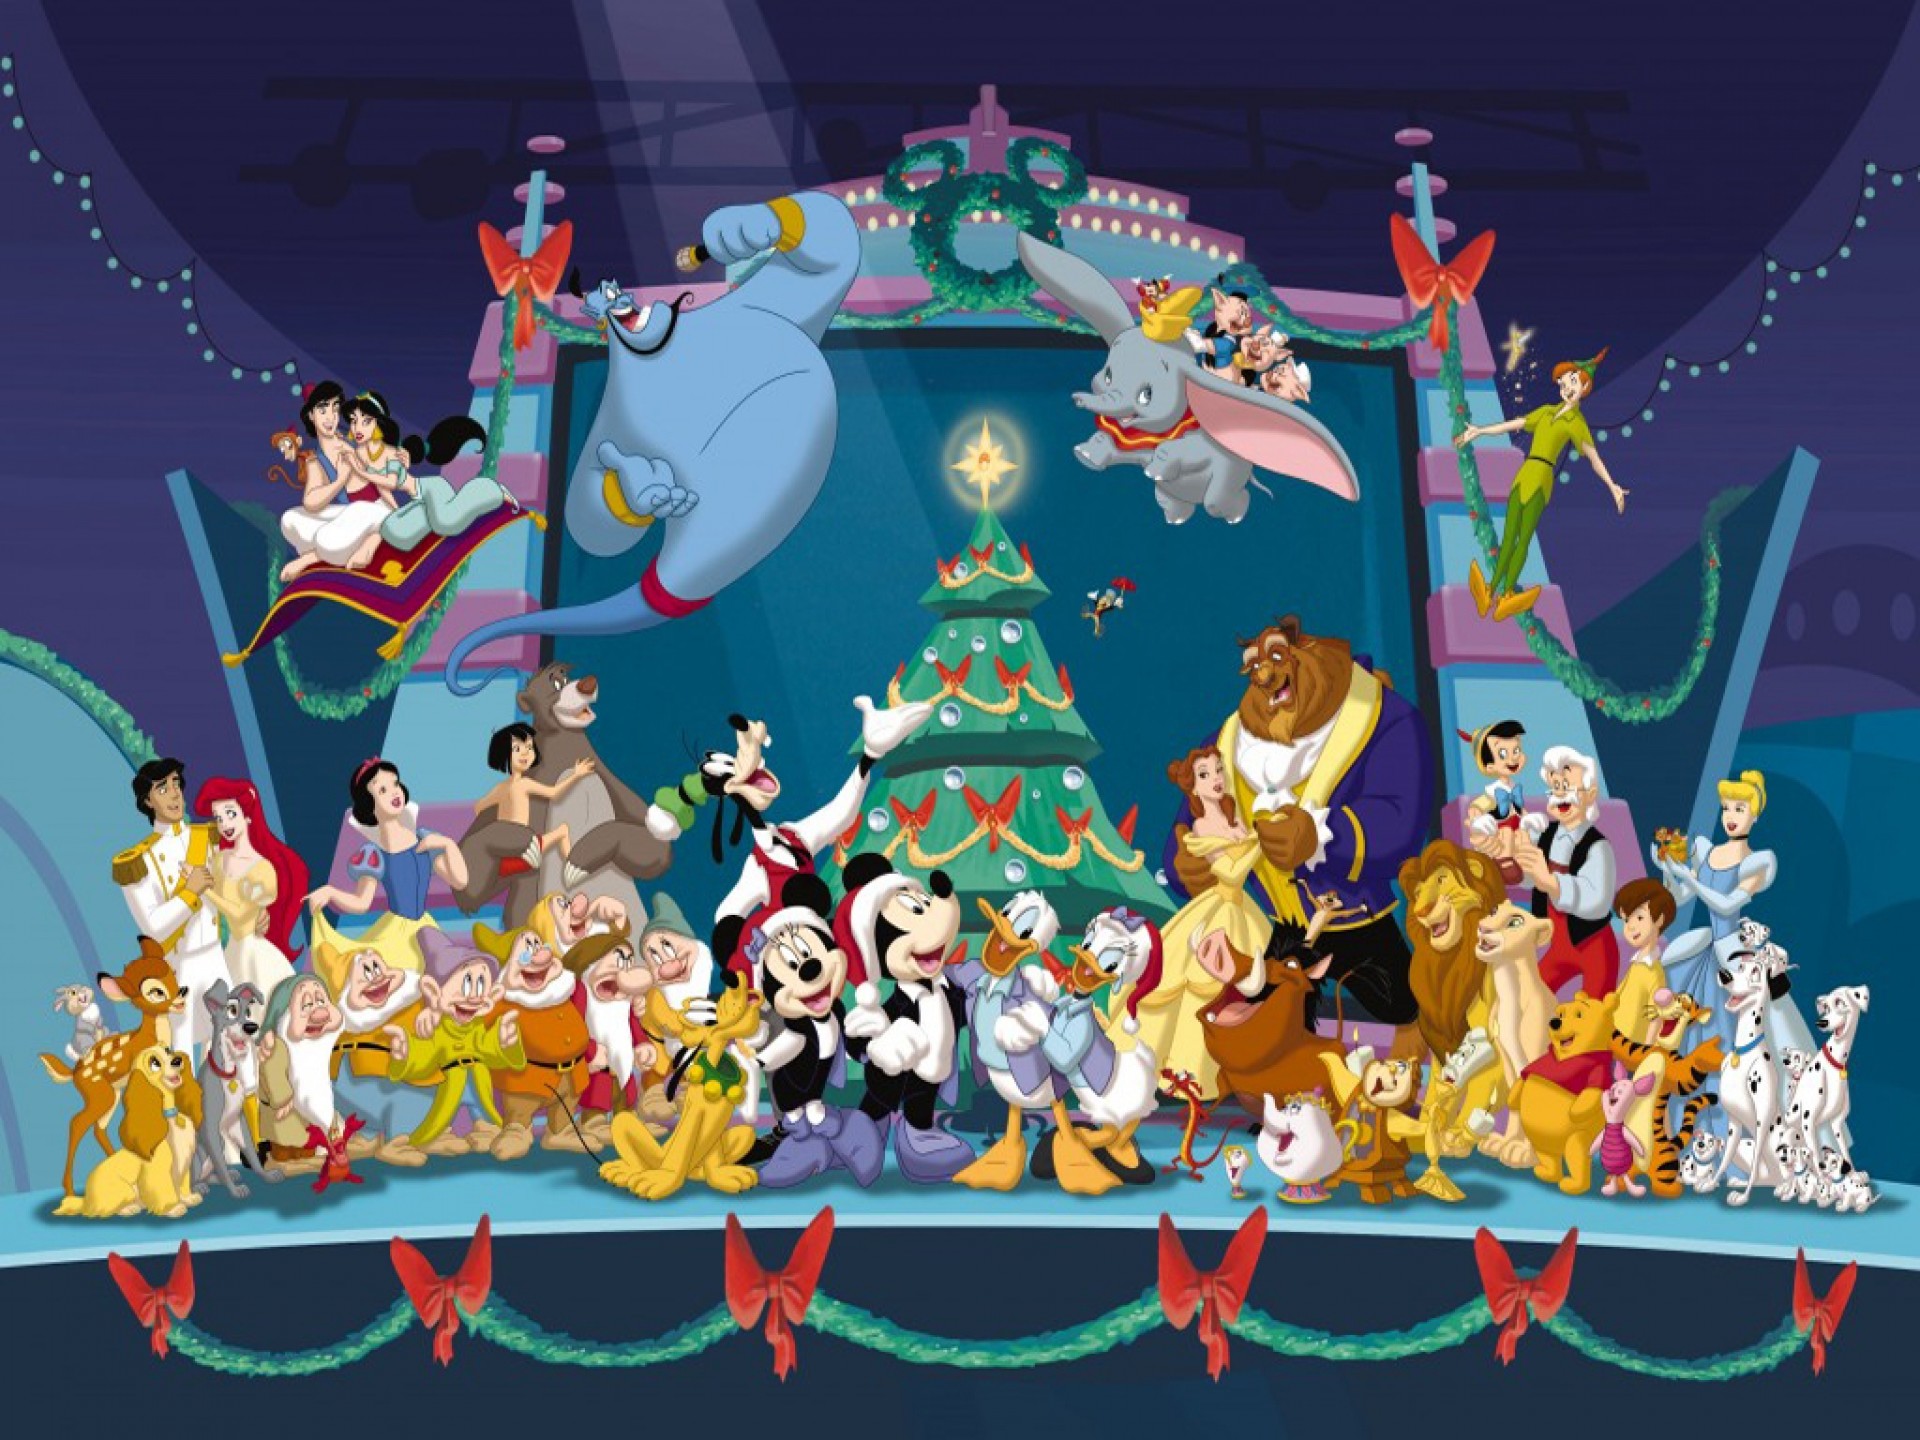 1920x1440, 62979 Disney Characters Christmas Wallpaper - Mickey's Magical  Christmas Snowed In At The House Of - 1920x1440 Wallpaper 